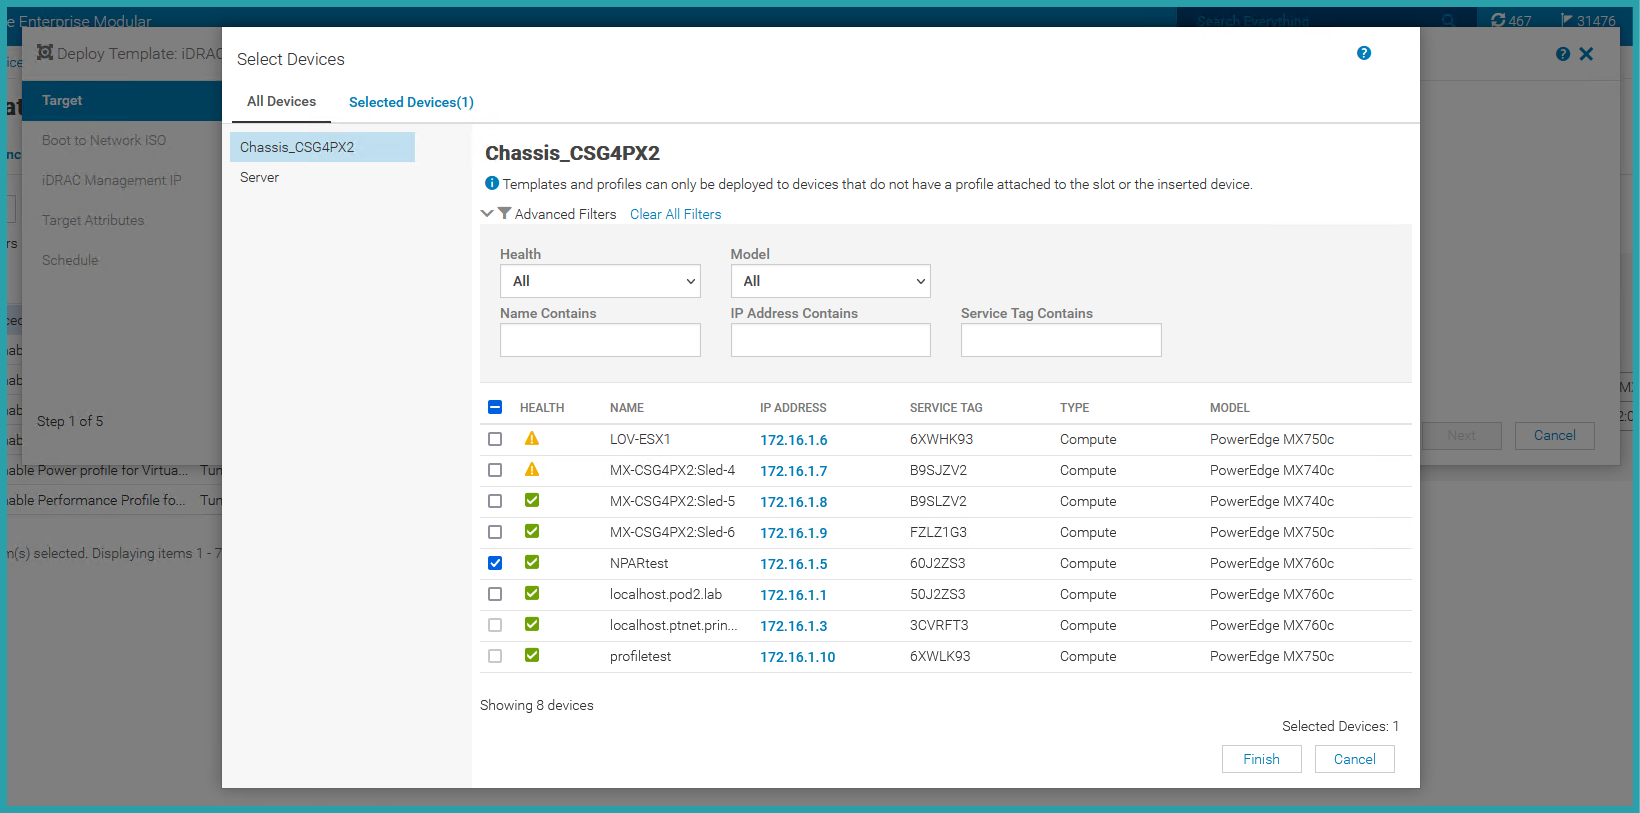 Screenshot of the Select Devices settings. Chassis_CSG4PX2 is selected. Health is set to All. Model is set to All. Name contains, IP Address Contains, and Sever Tag Contains are left blank. 8 devices are listed but only the device named NPARtest is selected. NPARtest IP address 172.16.1.5, Service Tag 60J2ZS3, Type Compute, Model PowerEdge MX760c. 